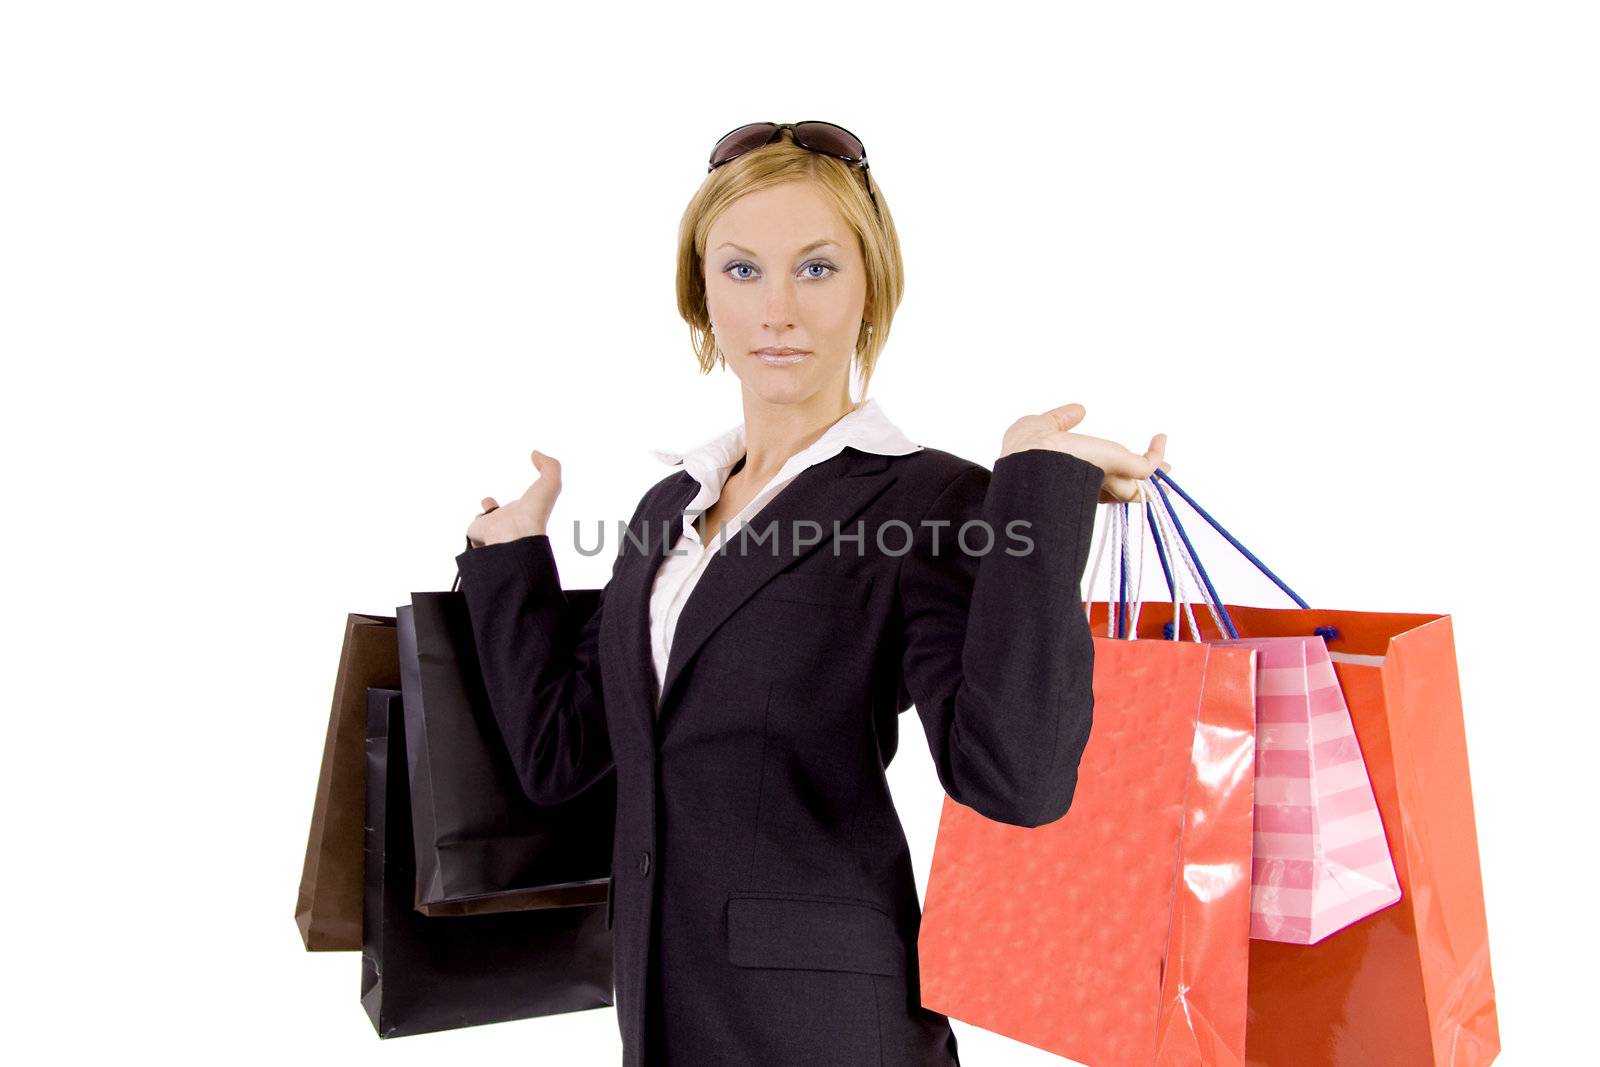 A Swedish blond woman holding a lot of shopping bags